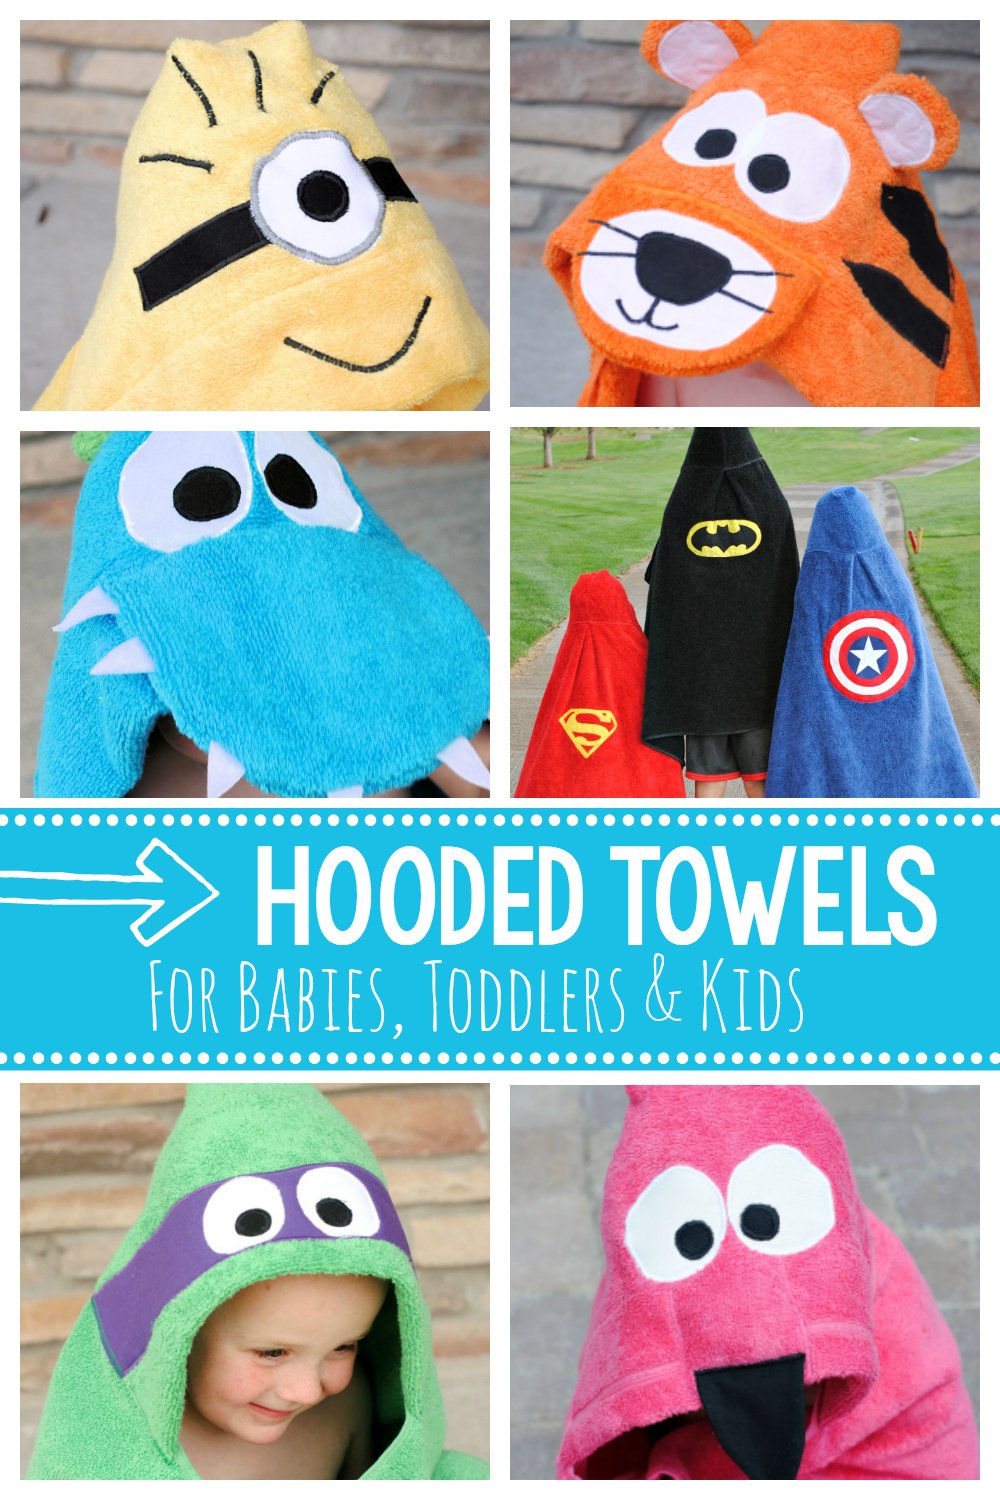 Children's Hooded Bath Towels-Patterns to sew all these cute kids towels (and more). Animals and favorite kids characters in a great hooded towel pattern. Makes a great gift! #bathtowels #hoodedtowels #sewing #sewingpatterns #sew #patterns #kids #forkids